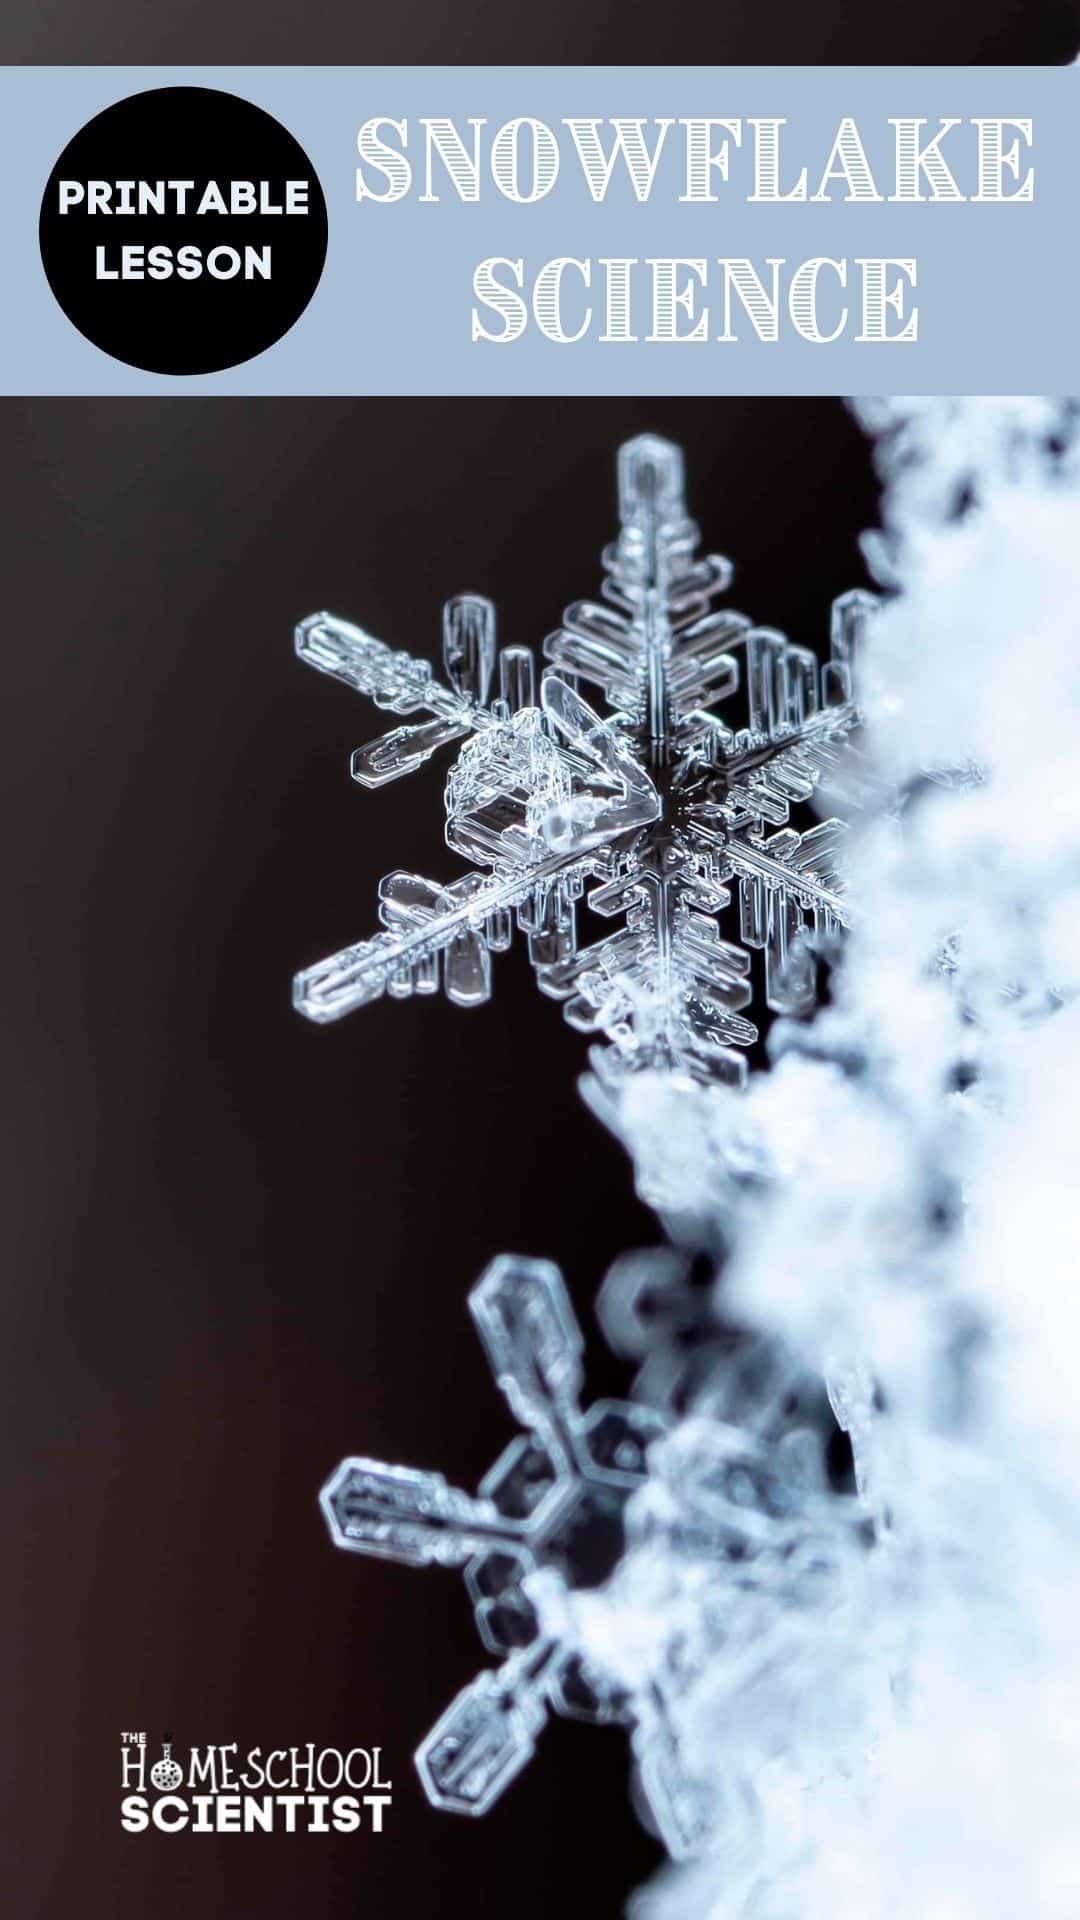 Snowflake Science Lesson for elementary through high school students. Includes a printable lesson PDF and links to other snow resources on our site...with more printables!